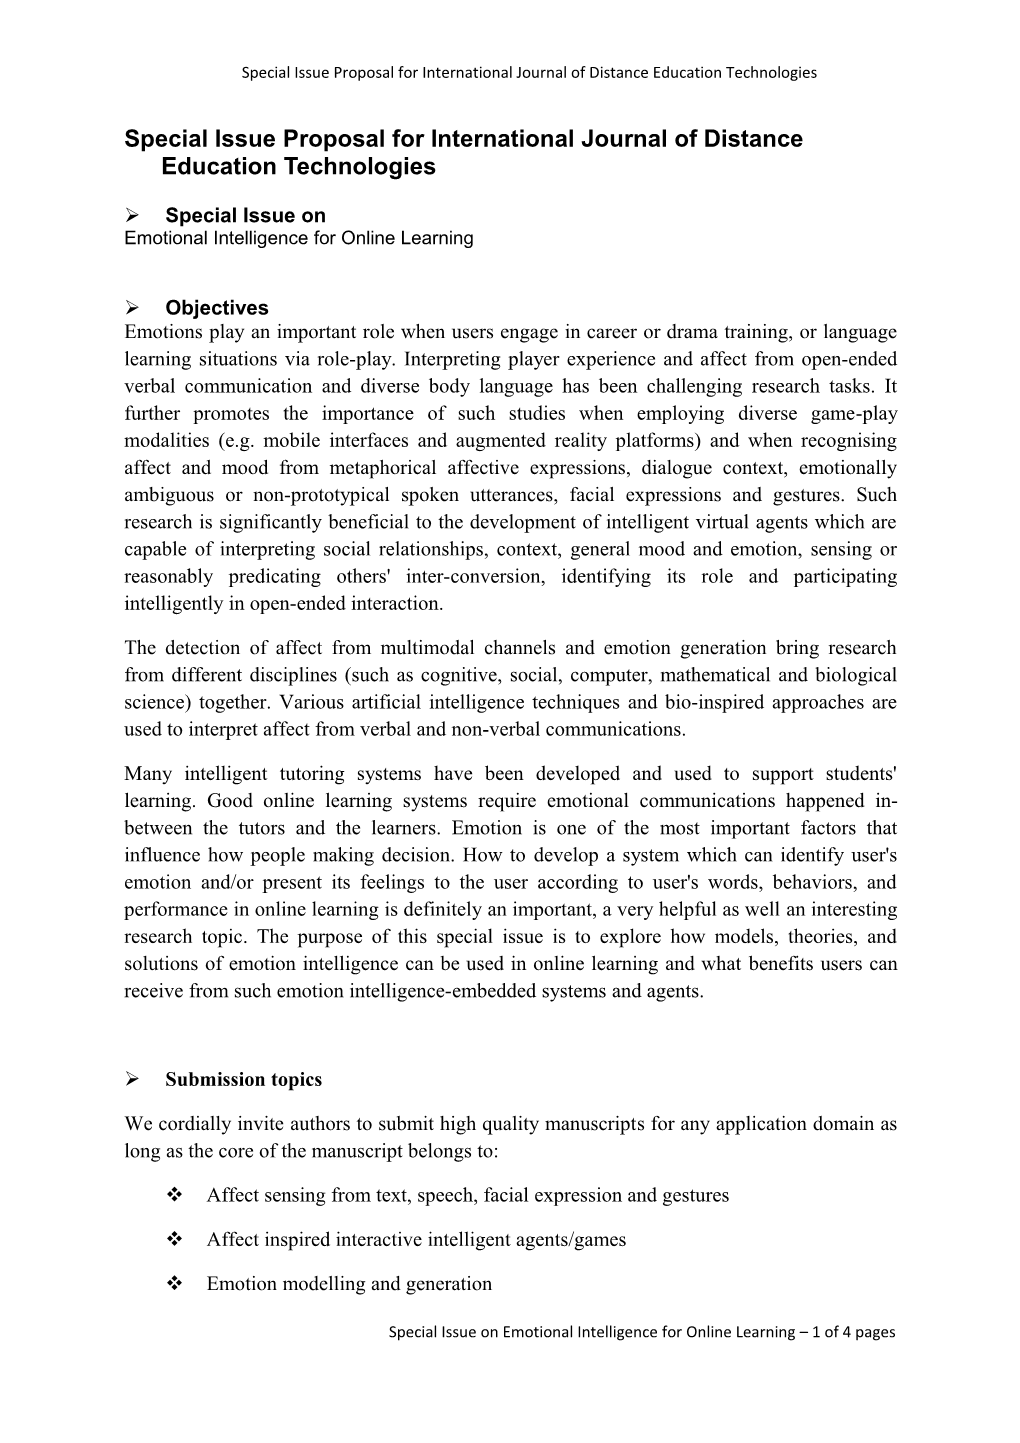 Description for Call for Special Issue